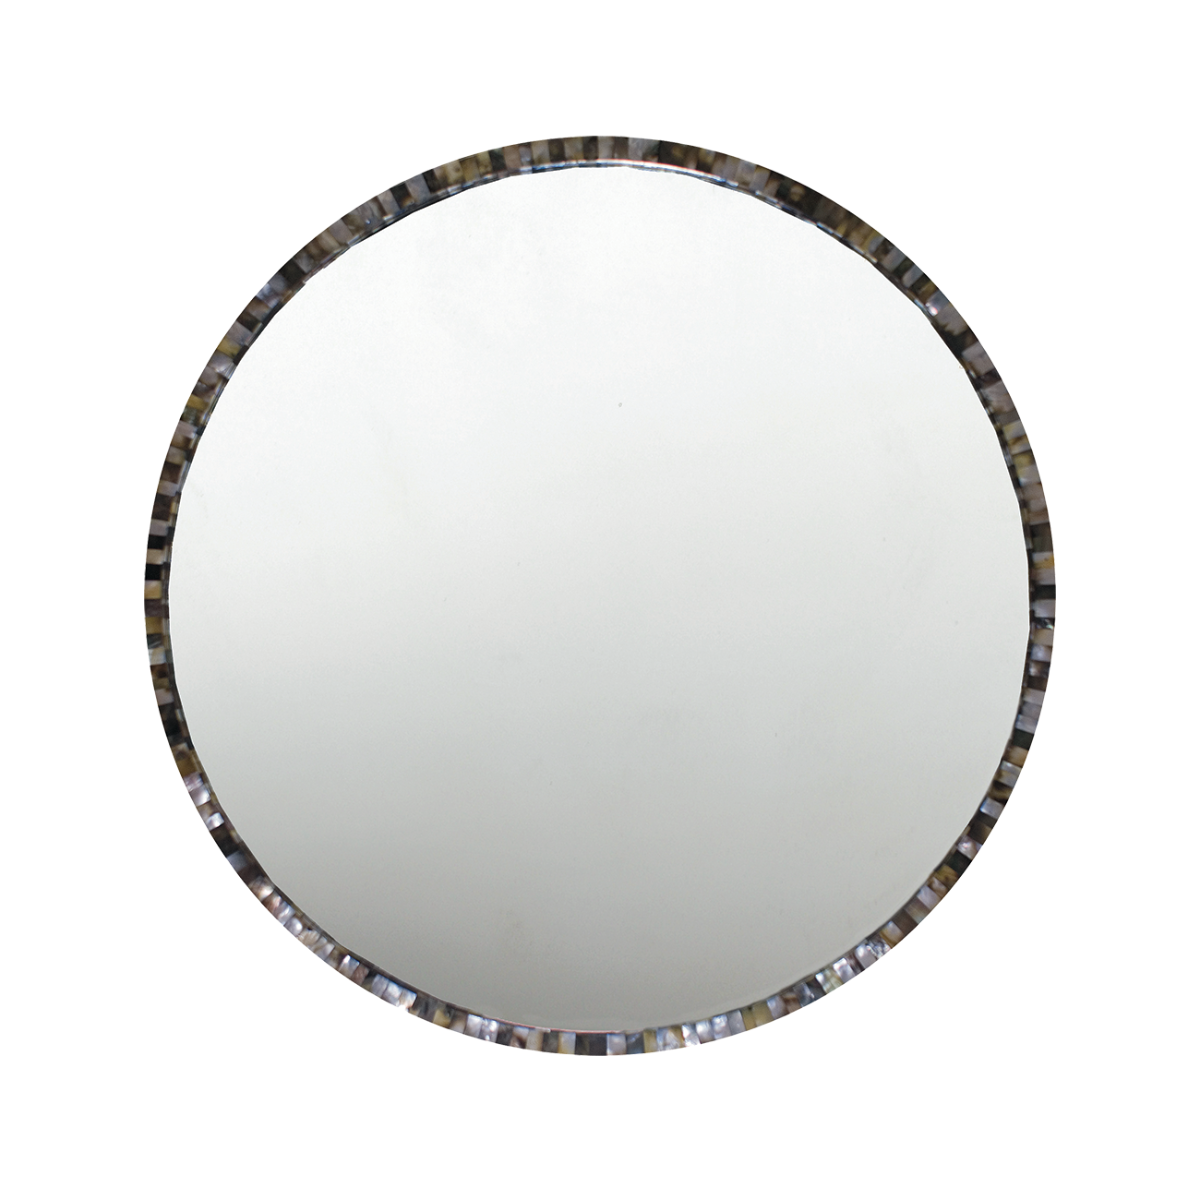 Pearl Round Mirror Large Olystudio Com, Large Round Mother Of Pearl Mirror